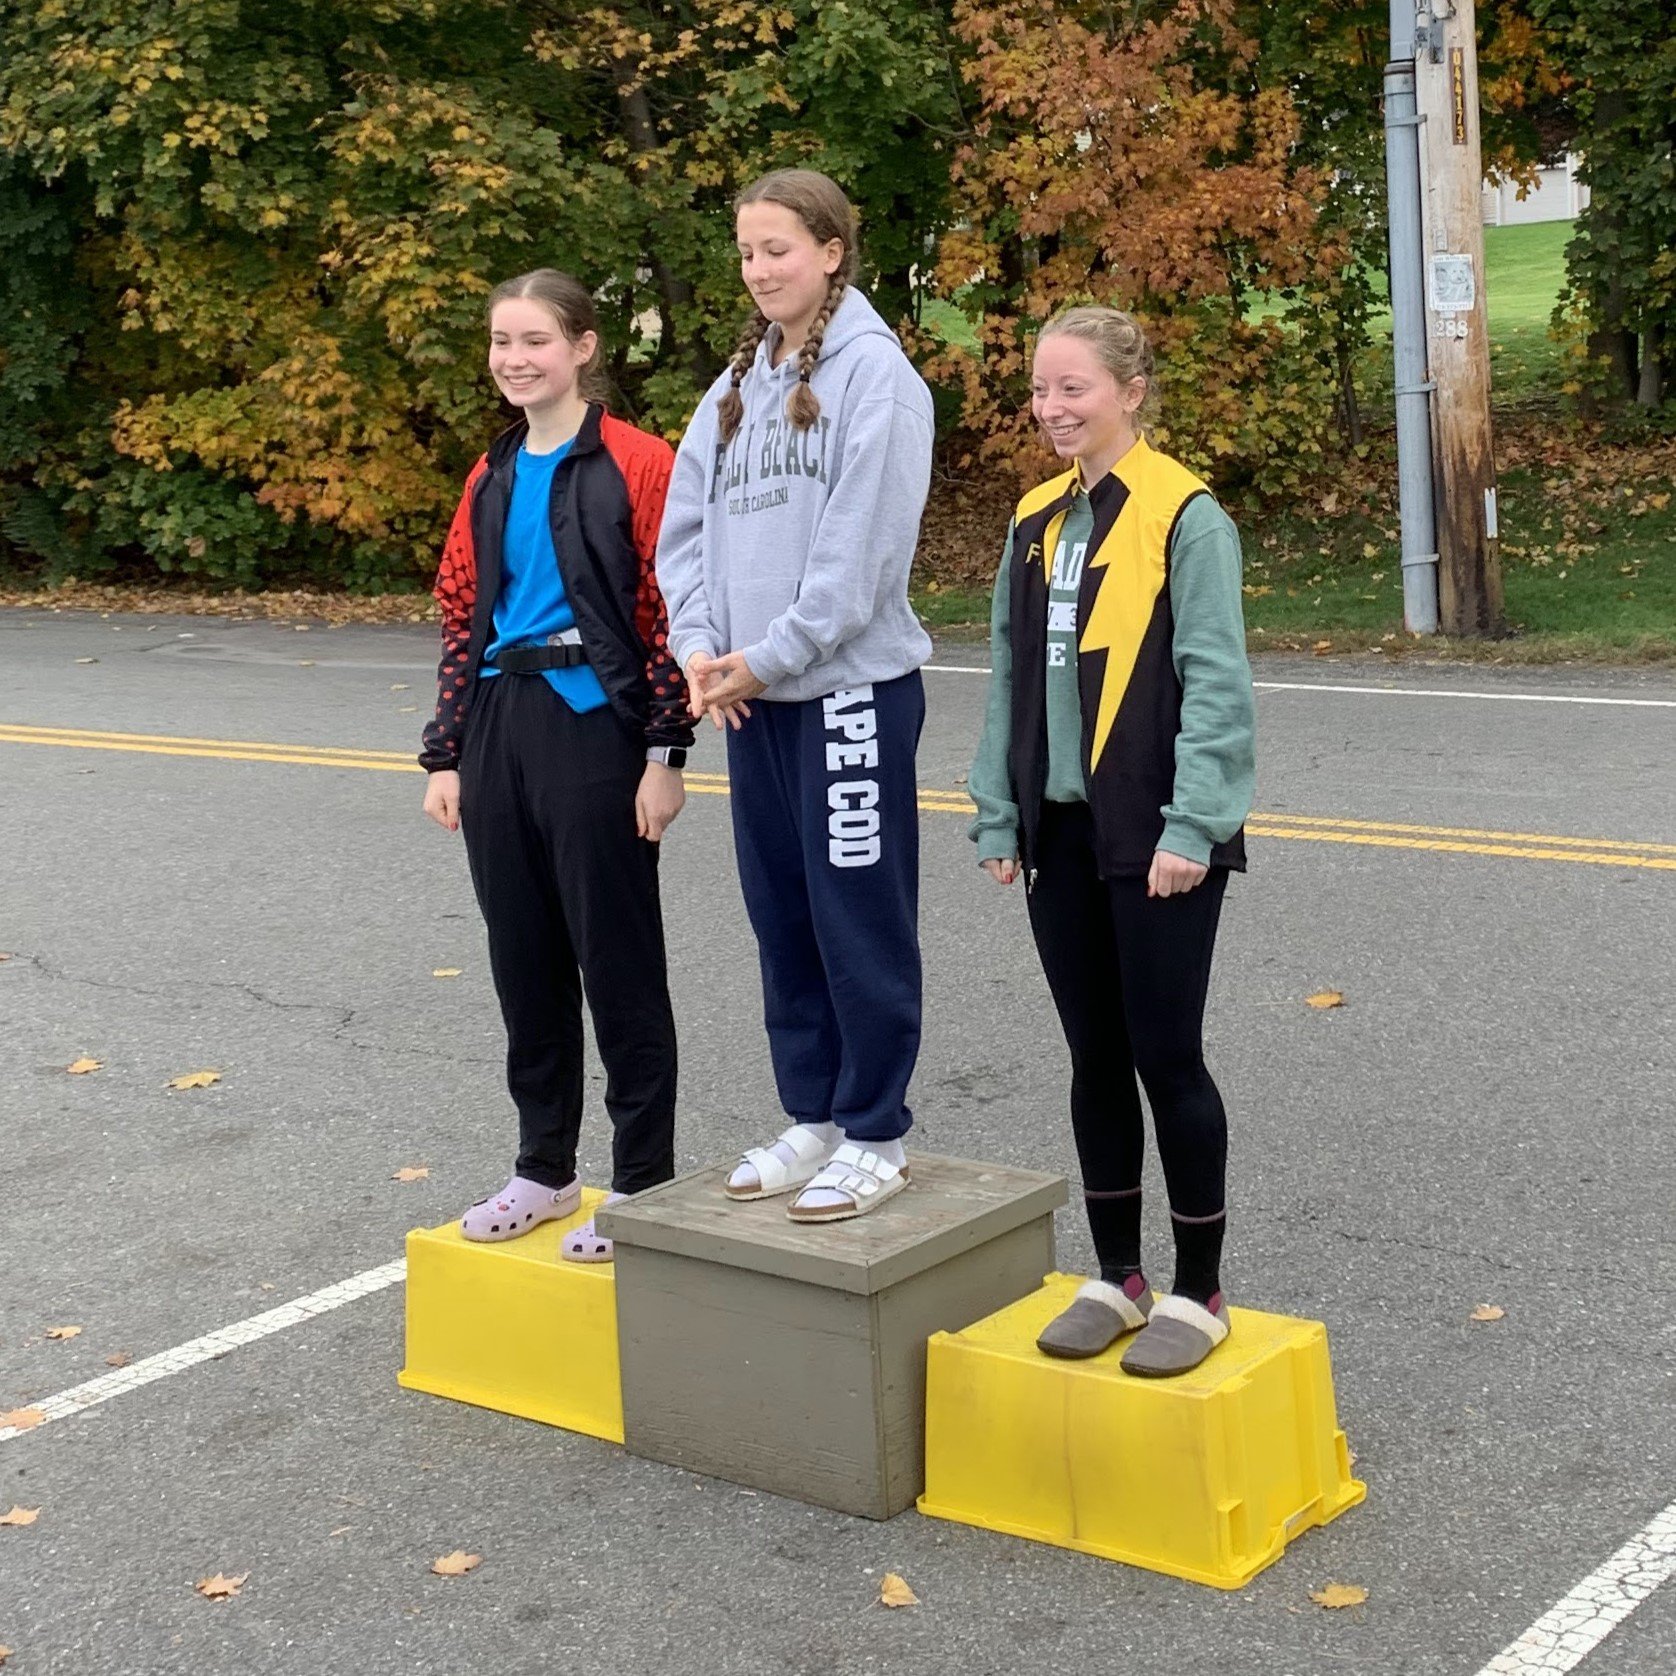 Lillie Salgado places 2nd in 7.5K Women's Race at the 2022 North Andover Fall Classic!